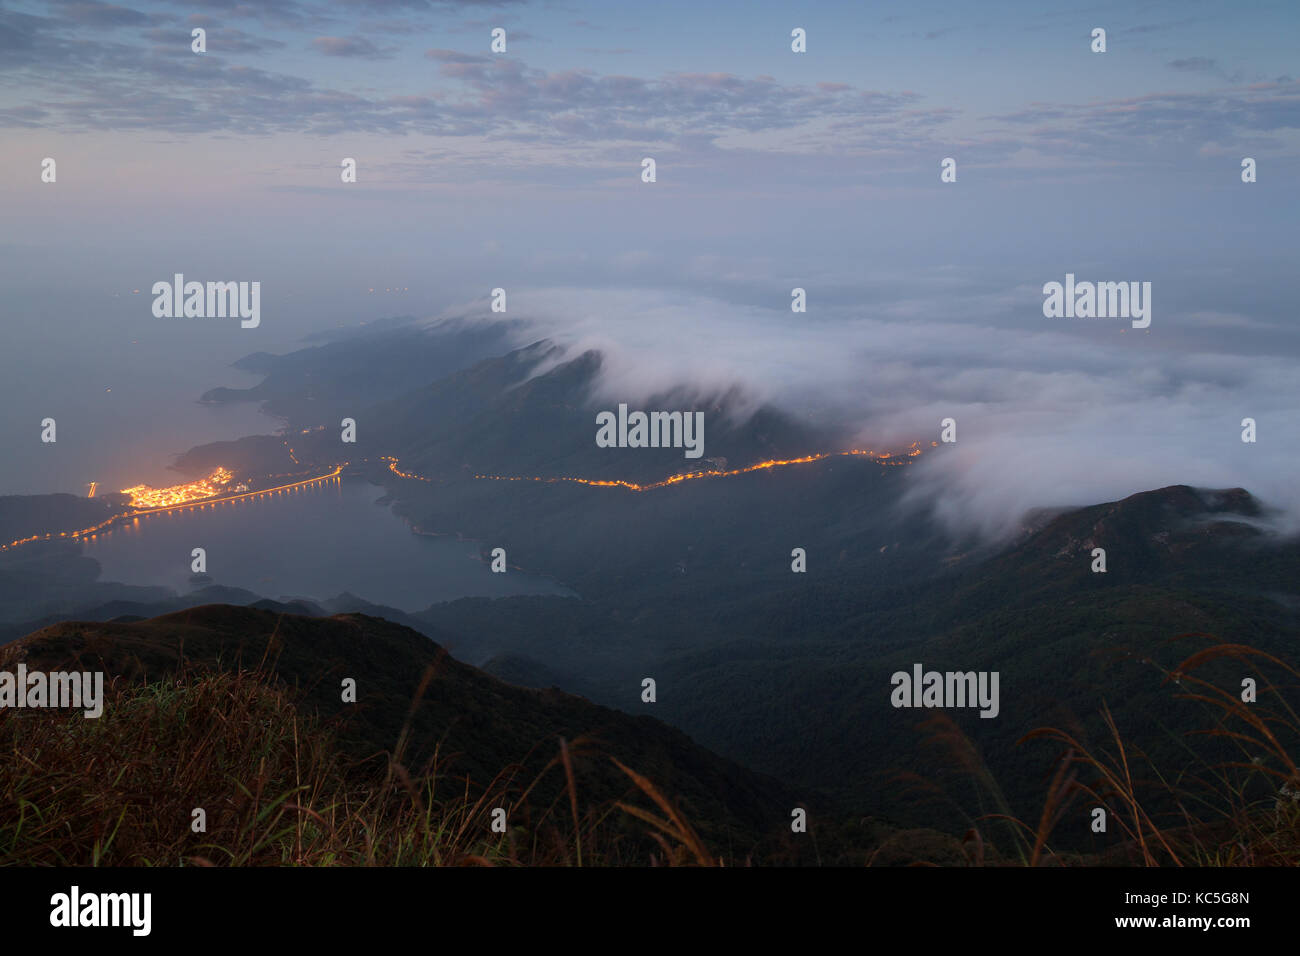 Clouds rolling over hills on the Lantau Island, viewed from the Lantau Peak (the 2nd highest peak in Hong Kong, China) at dawn. Stock Photo